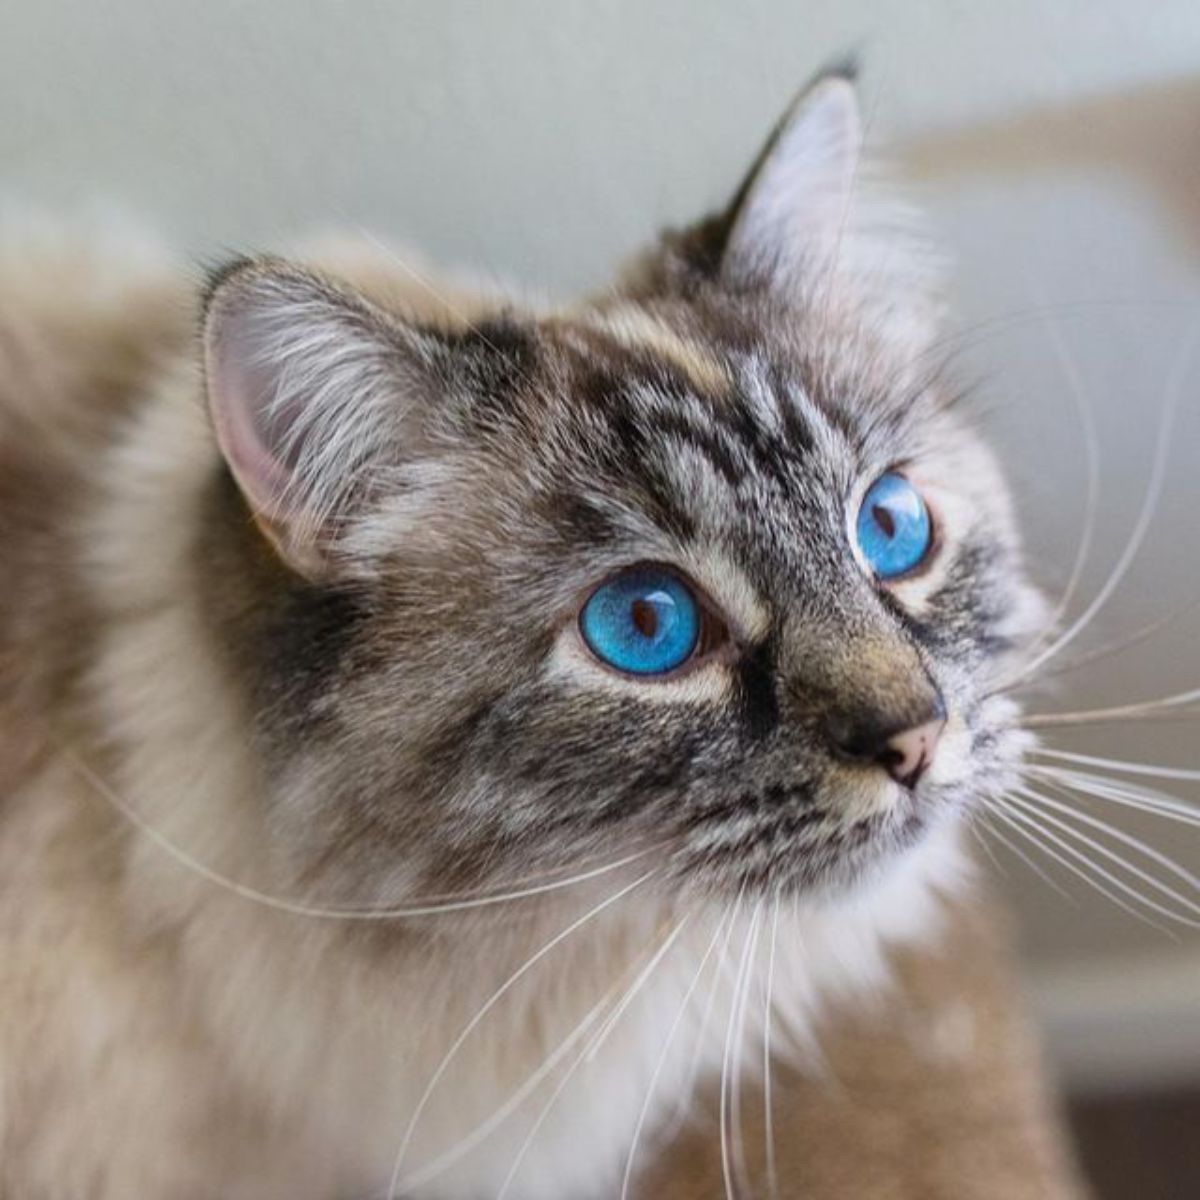 A close-up of a blue-eyed gray cat face.